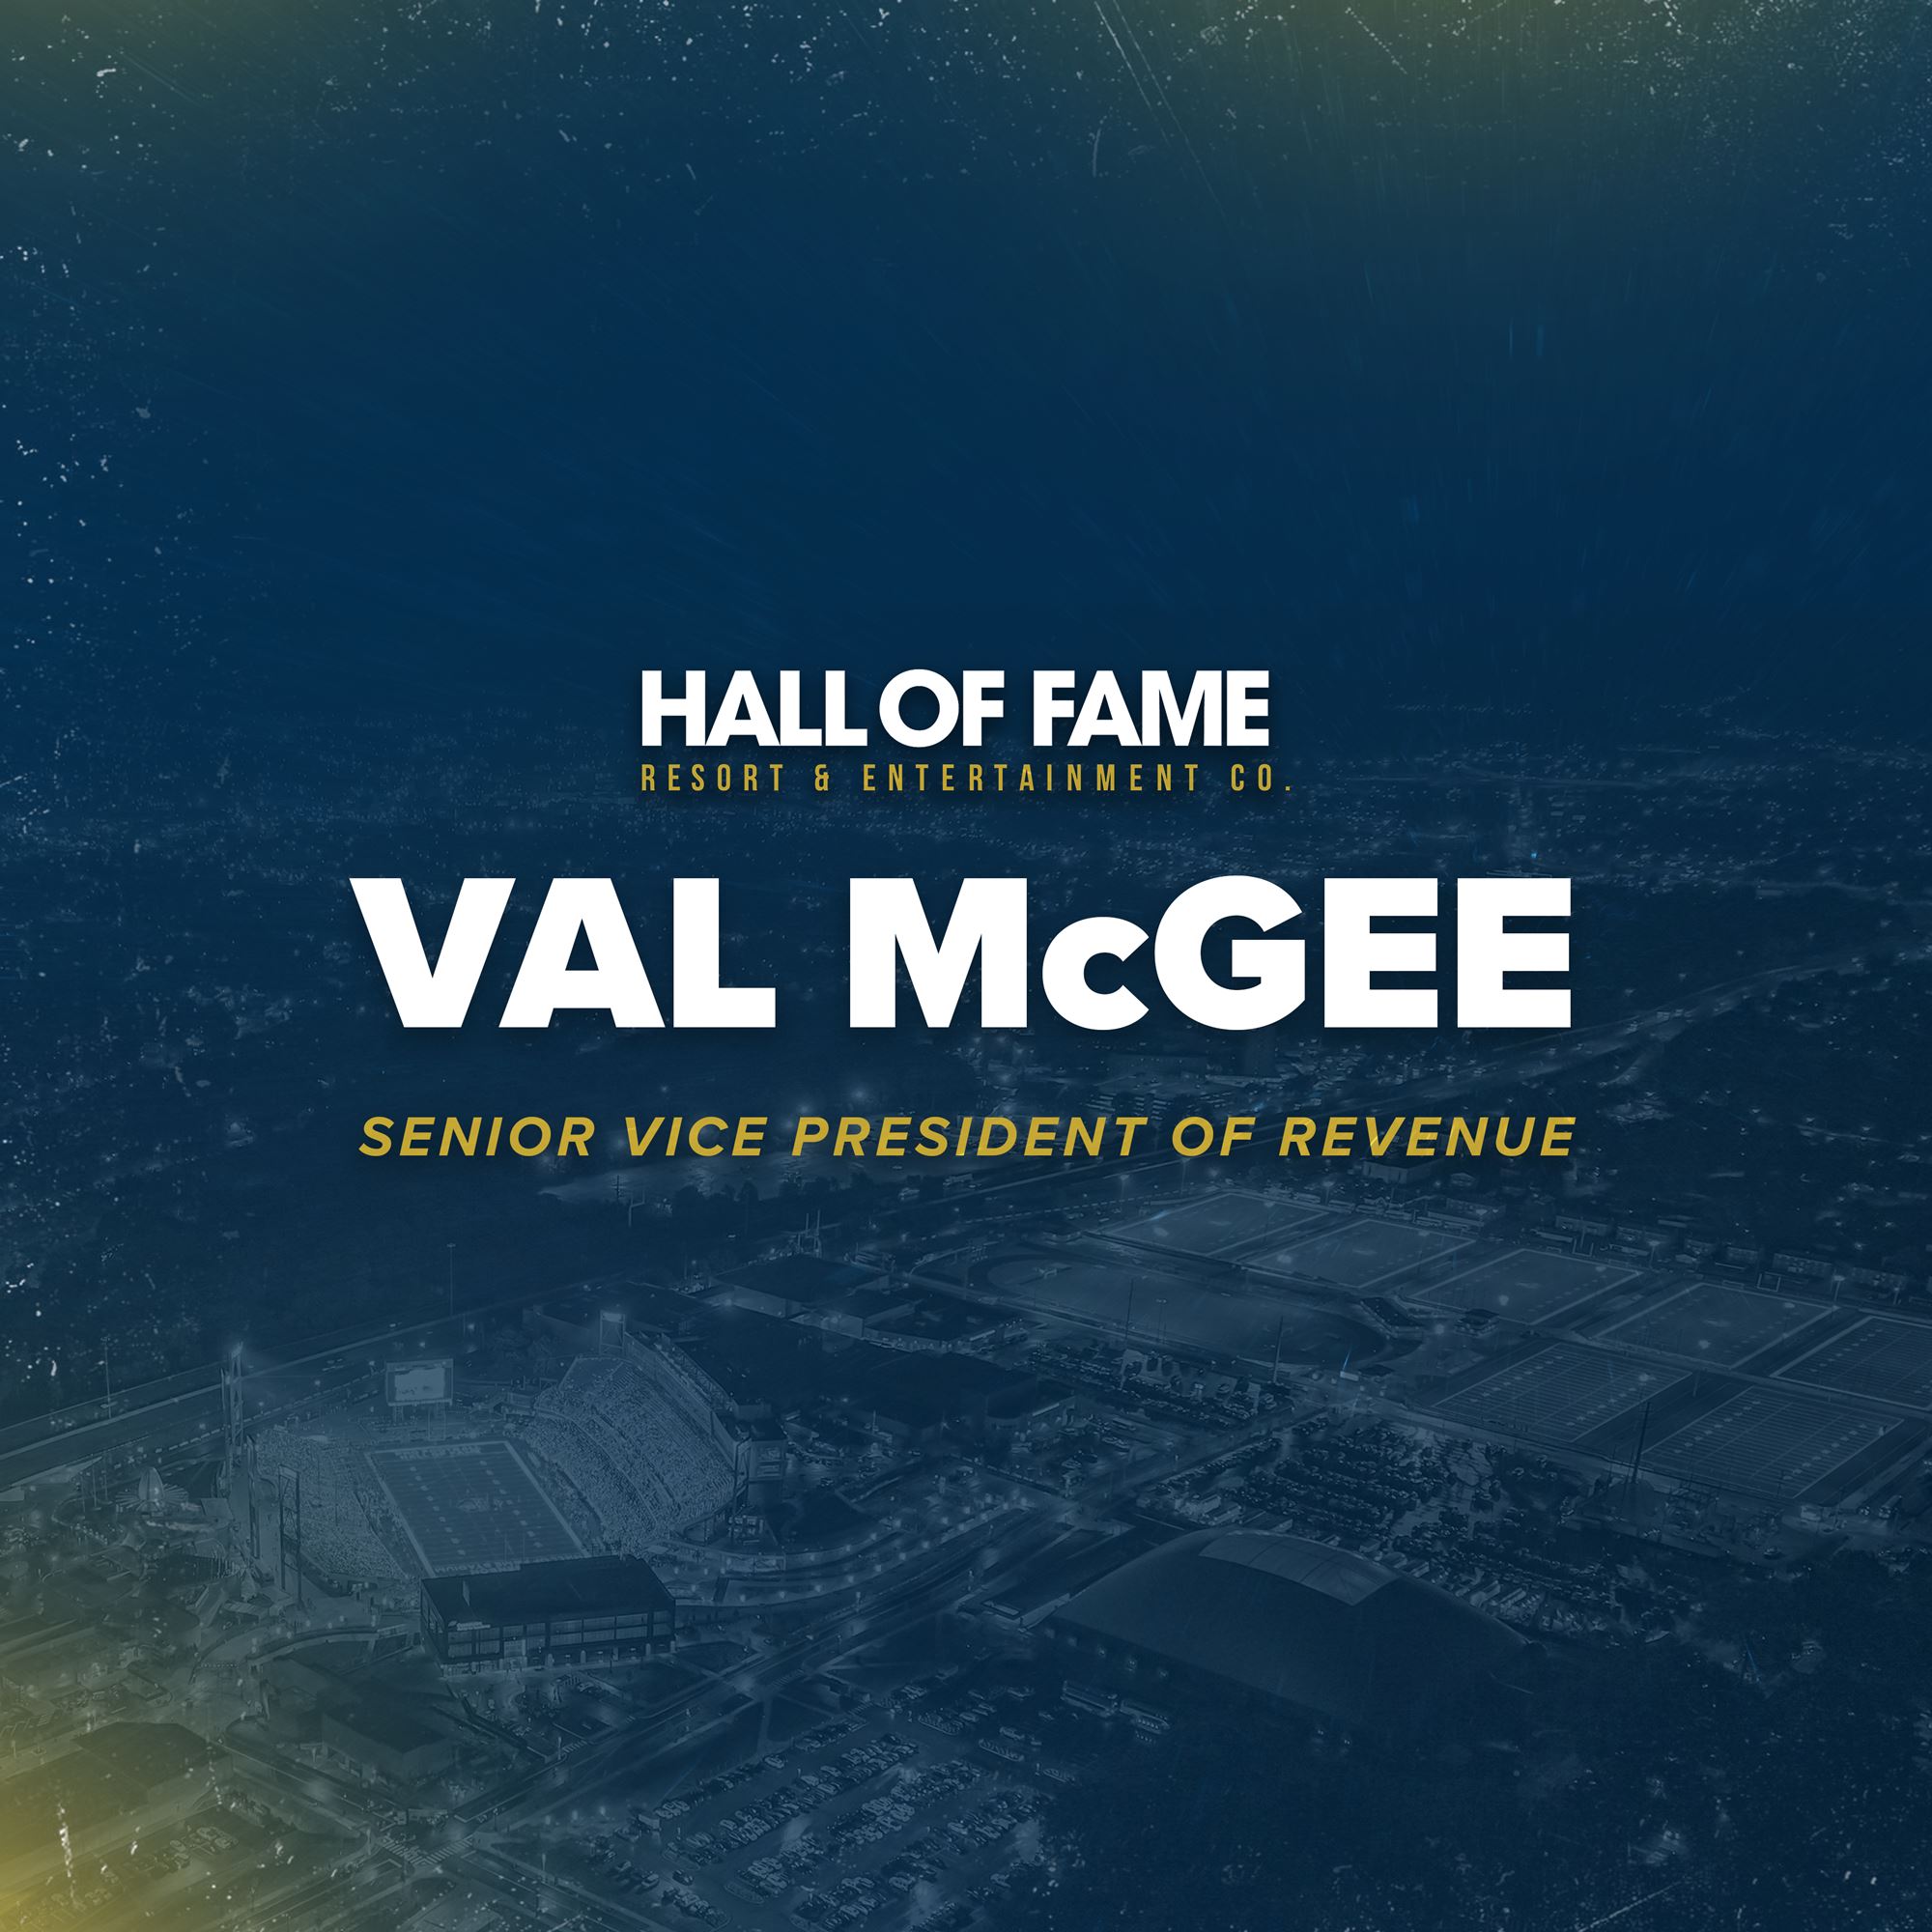 Hall of Fame Resort & Entertainment Company Welcomes Val McGee as Senior Vice President of Revenue